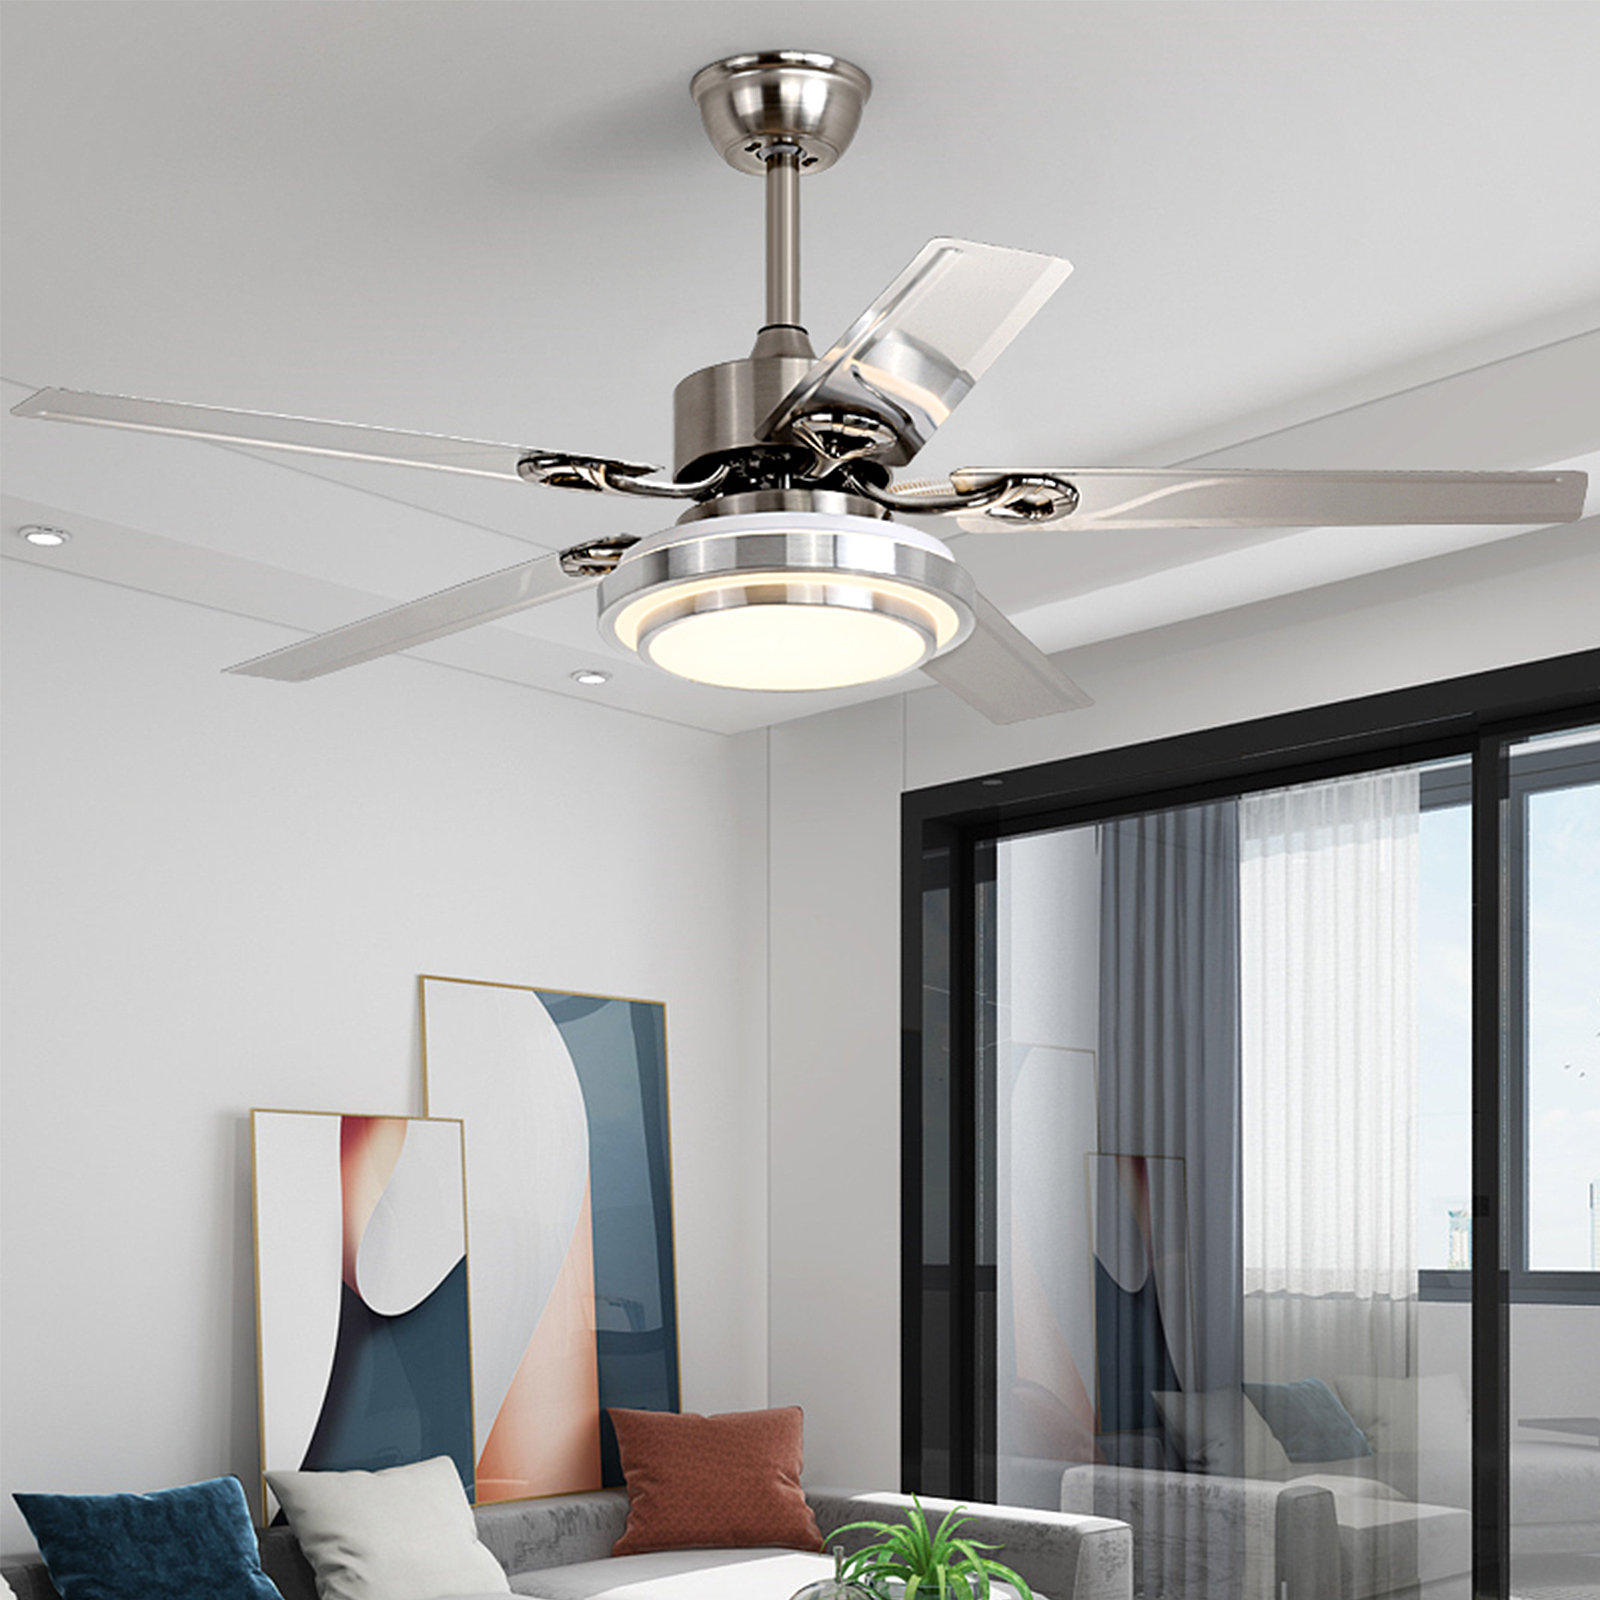 5 Stainless Steel Blades Ceiling Fan Lamp Remote Control Chandelier 42"/48"/52" 